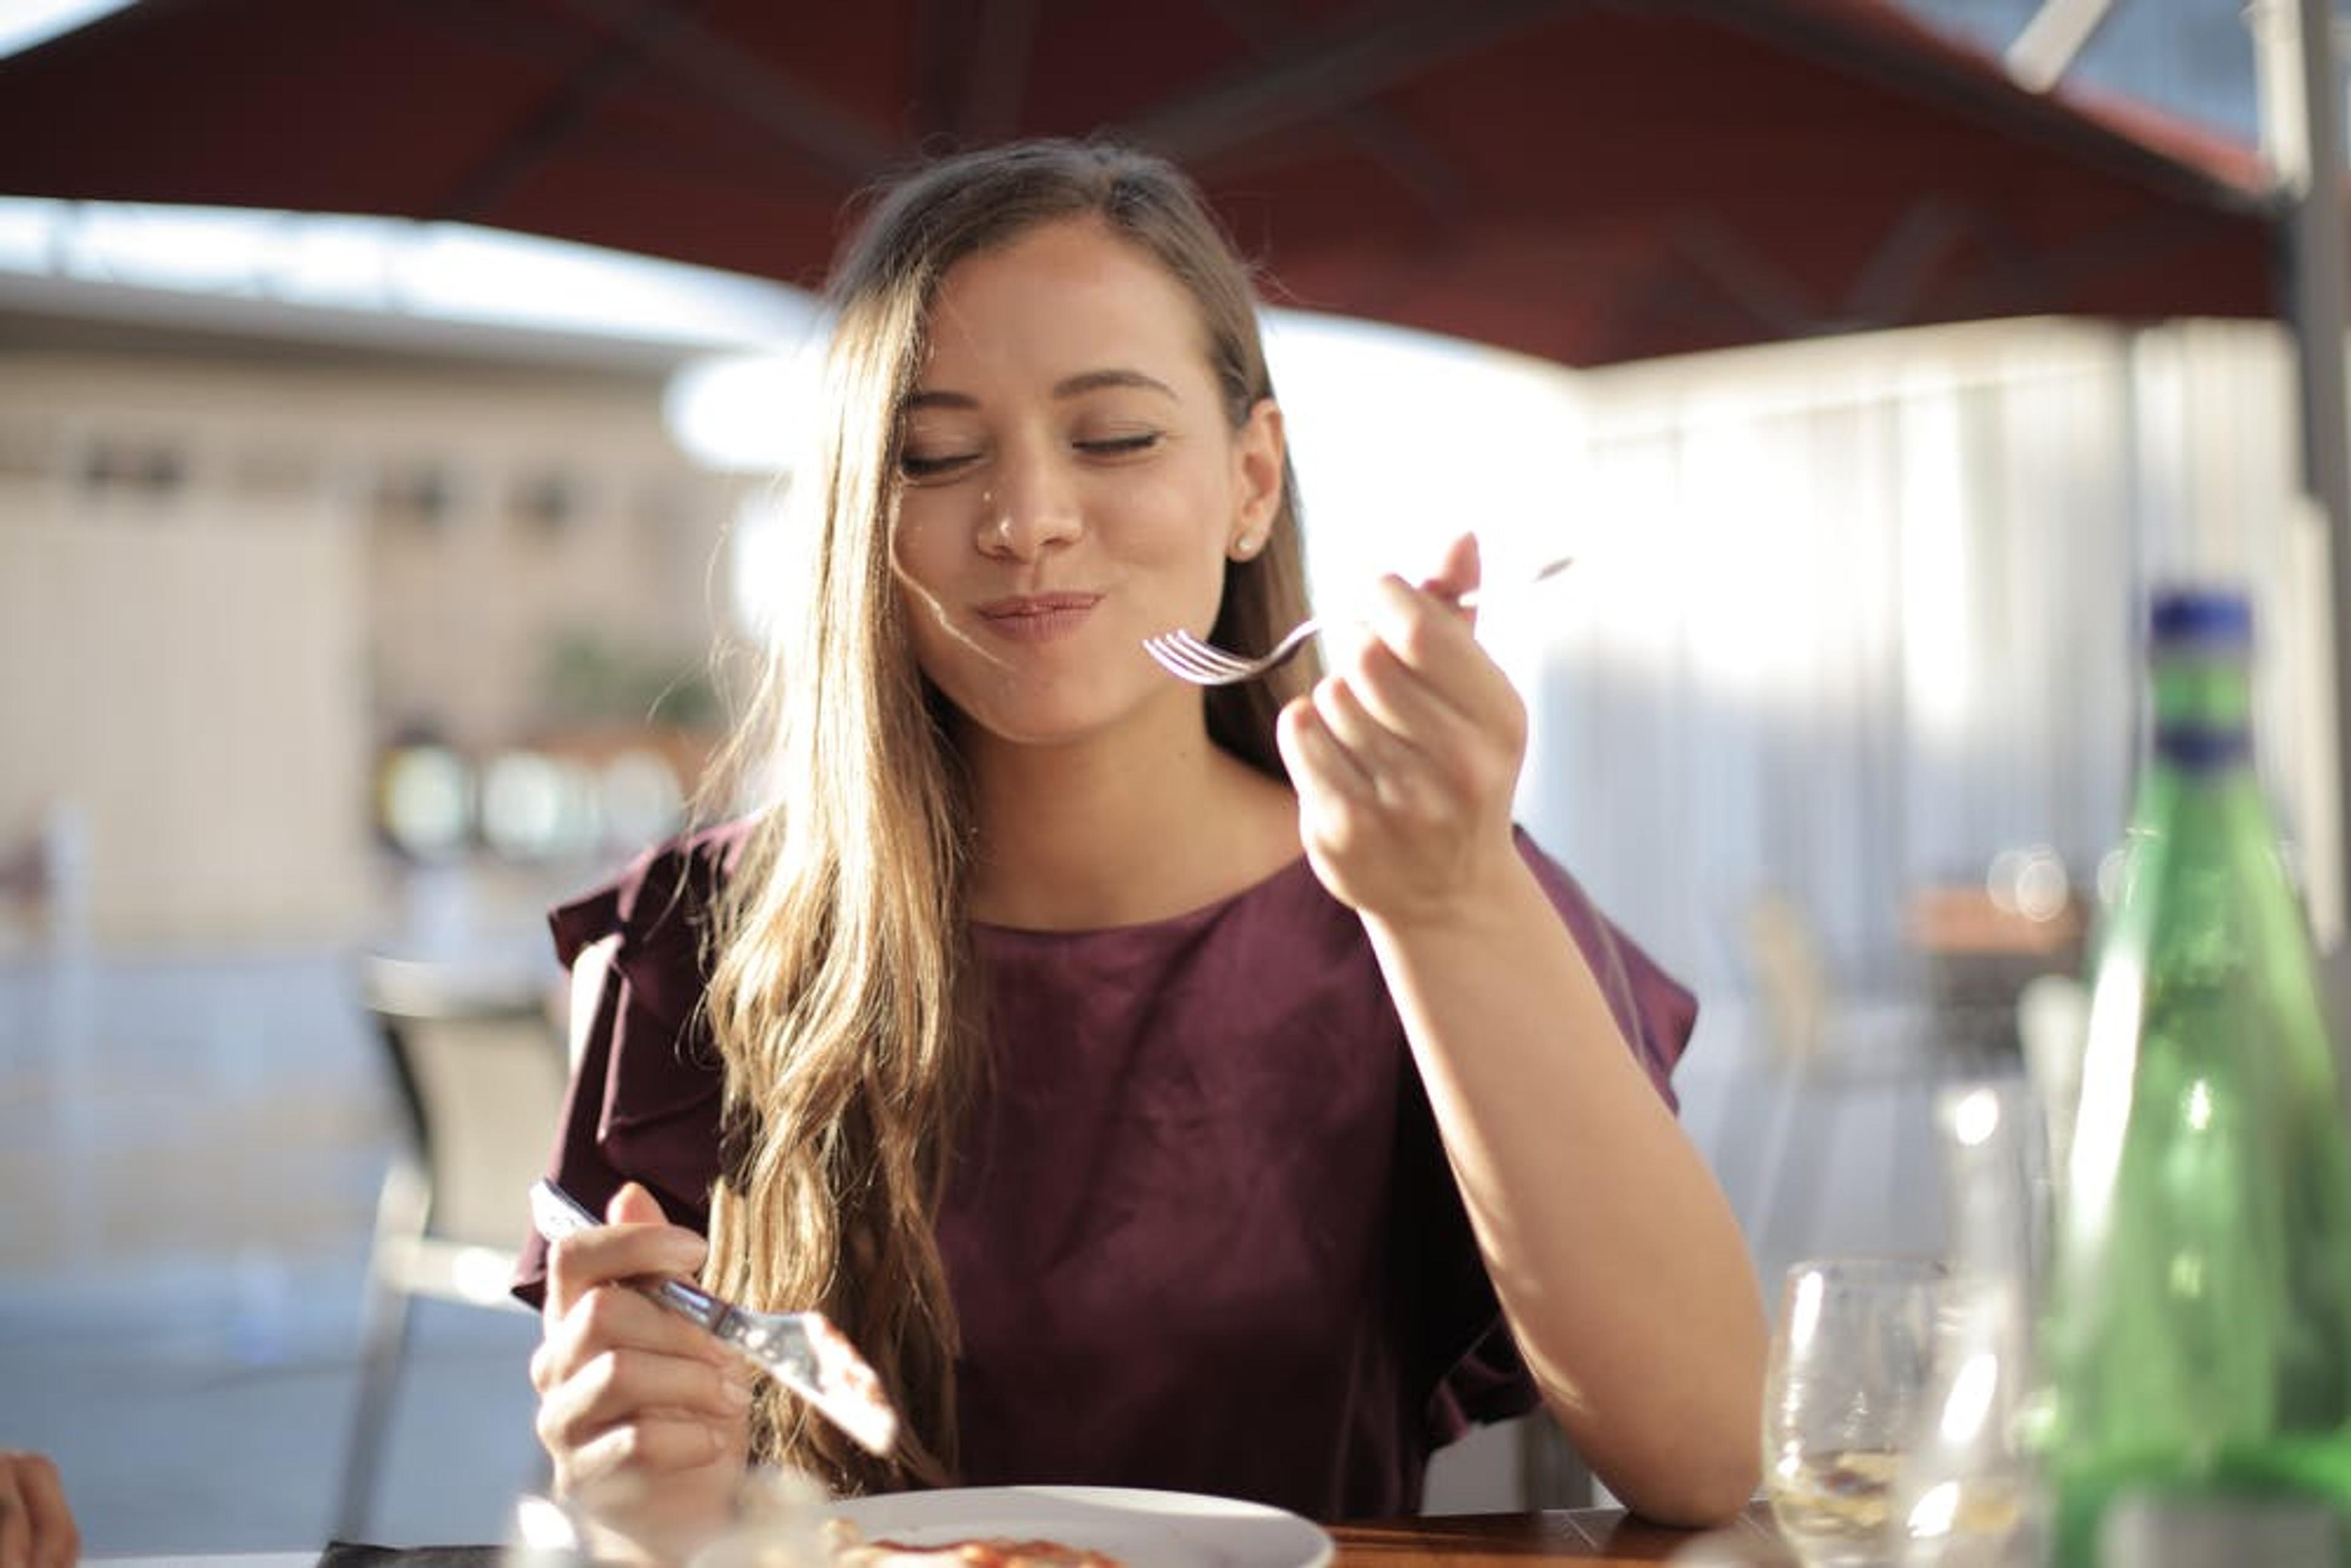 A smiling woman at an outdoor restaurant eats a bite of food